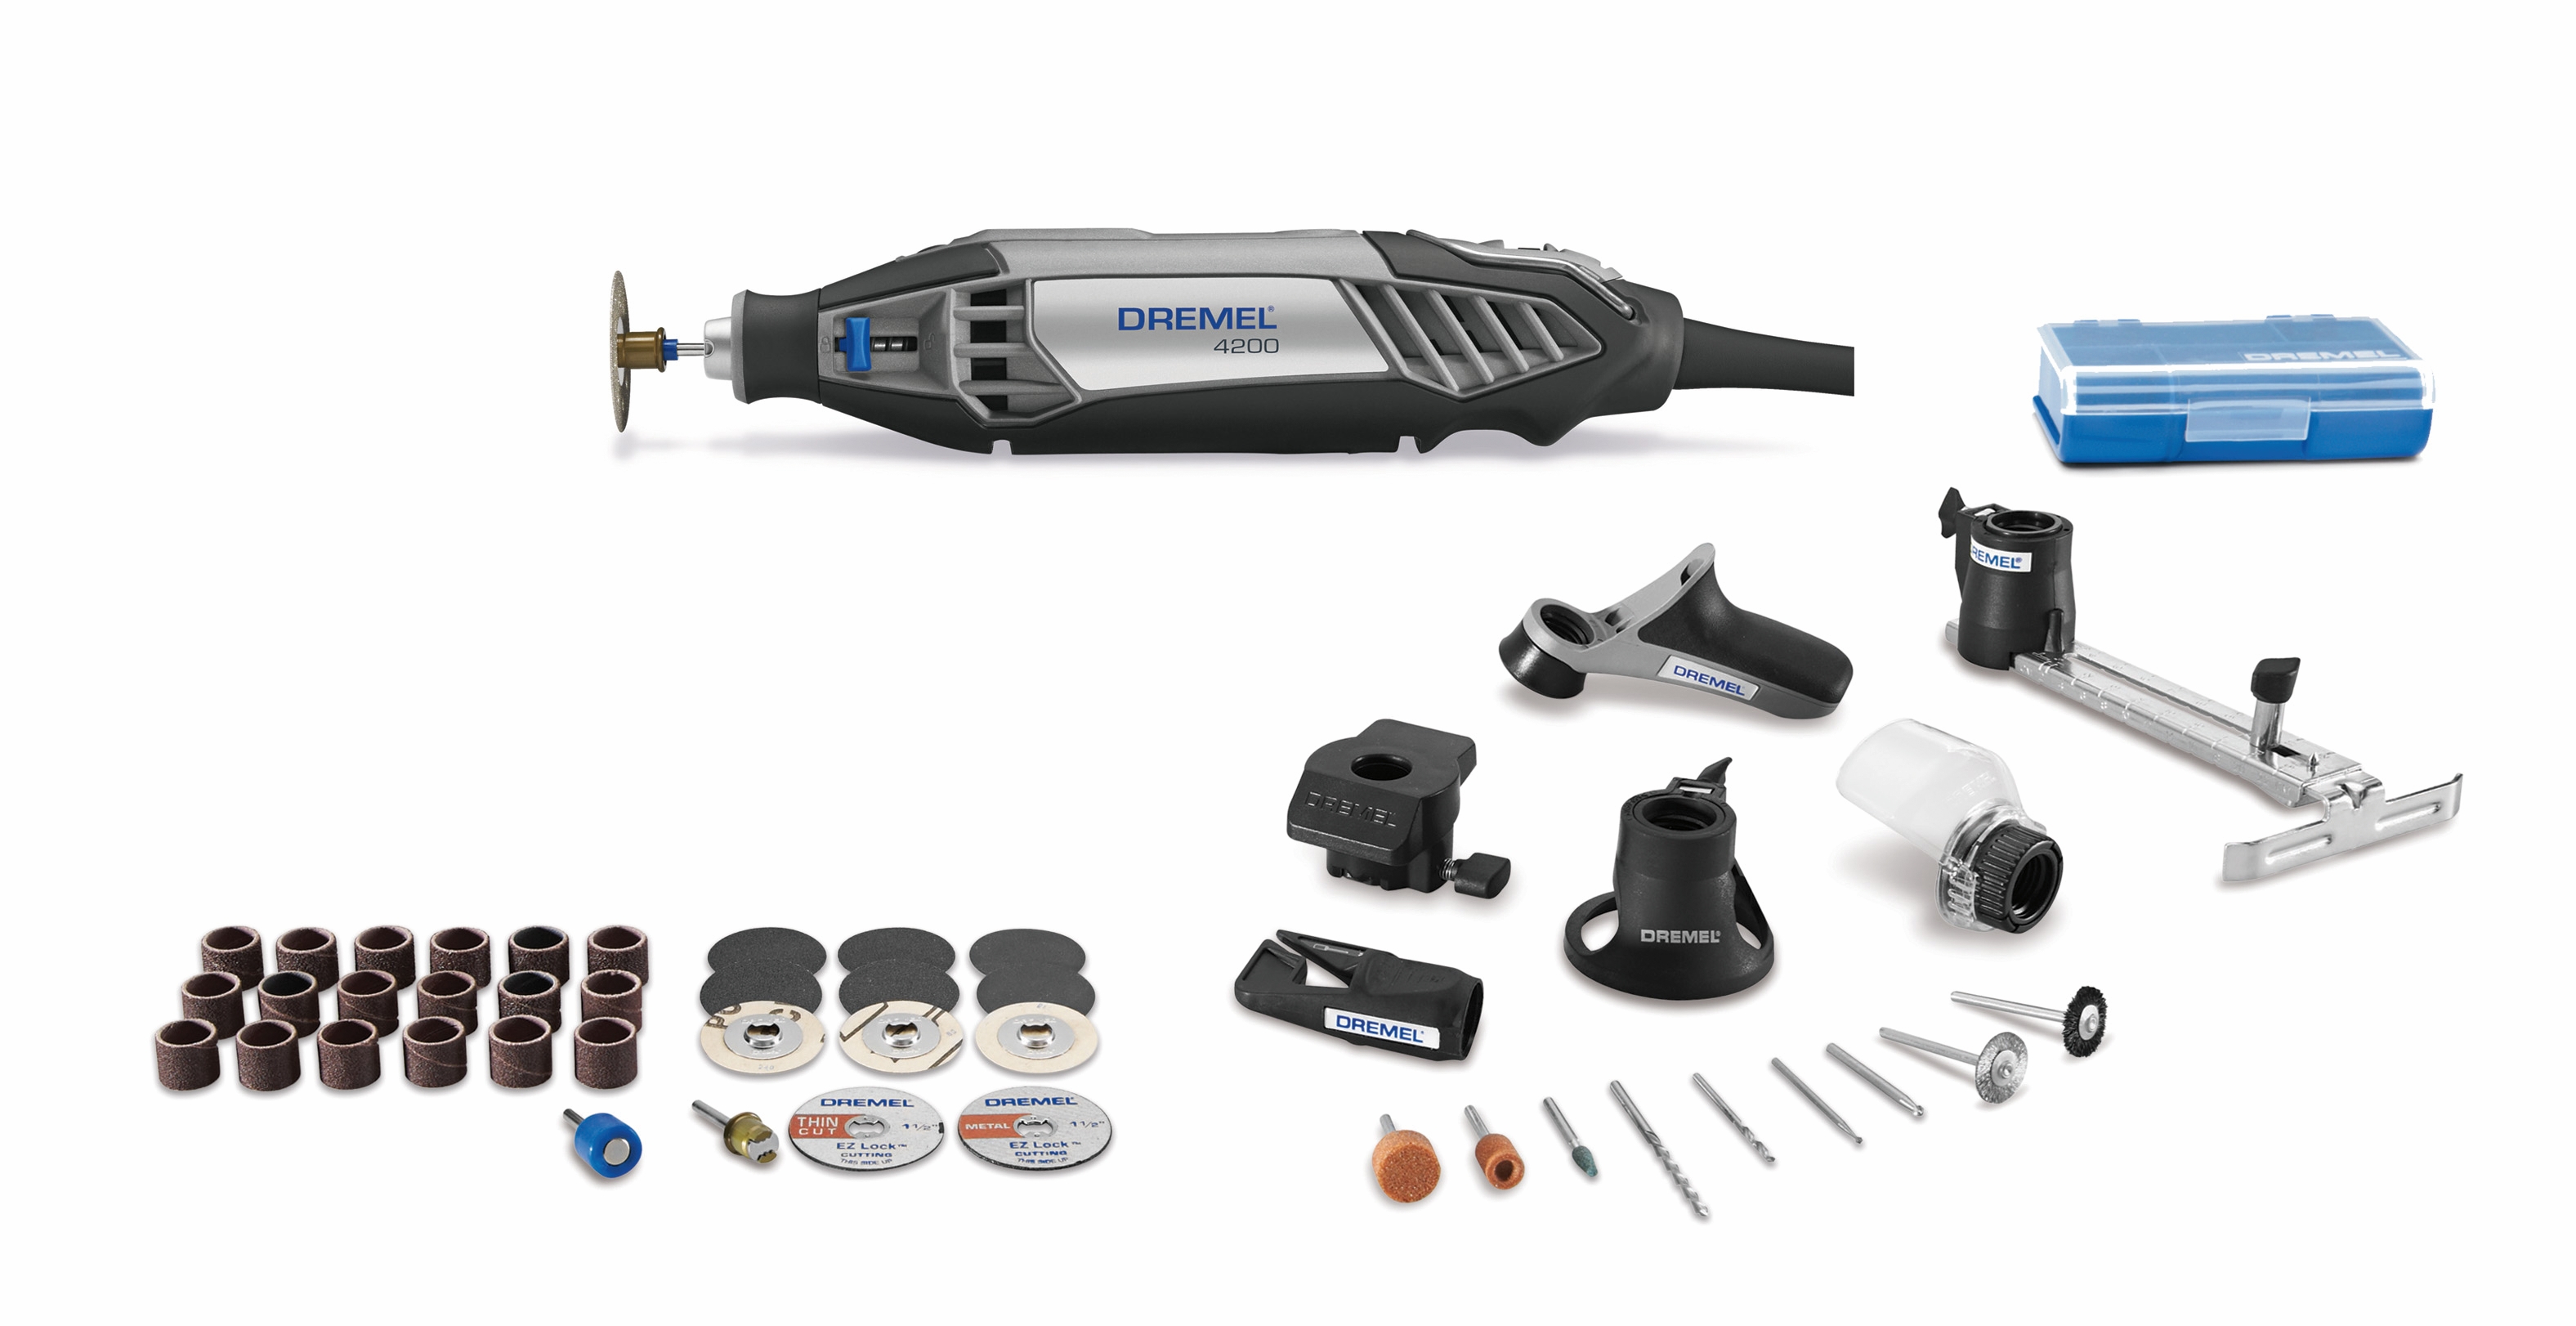 Dremel 4200-4/36 1.6 Amp Corded Variable Speed Rotary Tool Kit with 41 Accessories and 4 Attachments - image 1 of 8